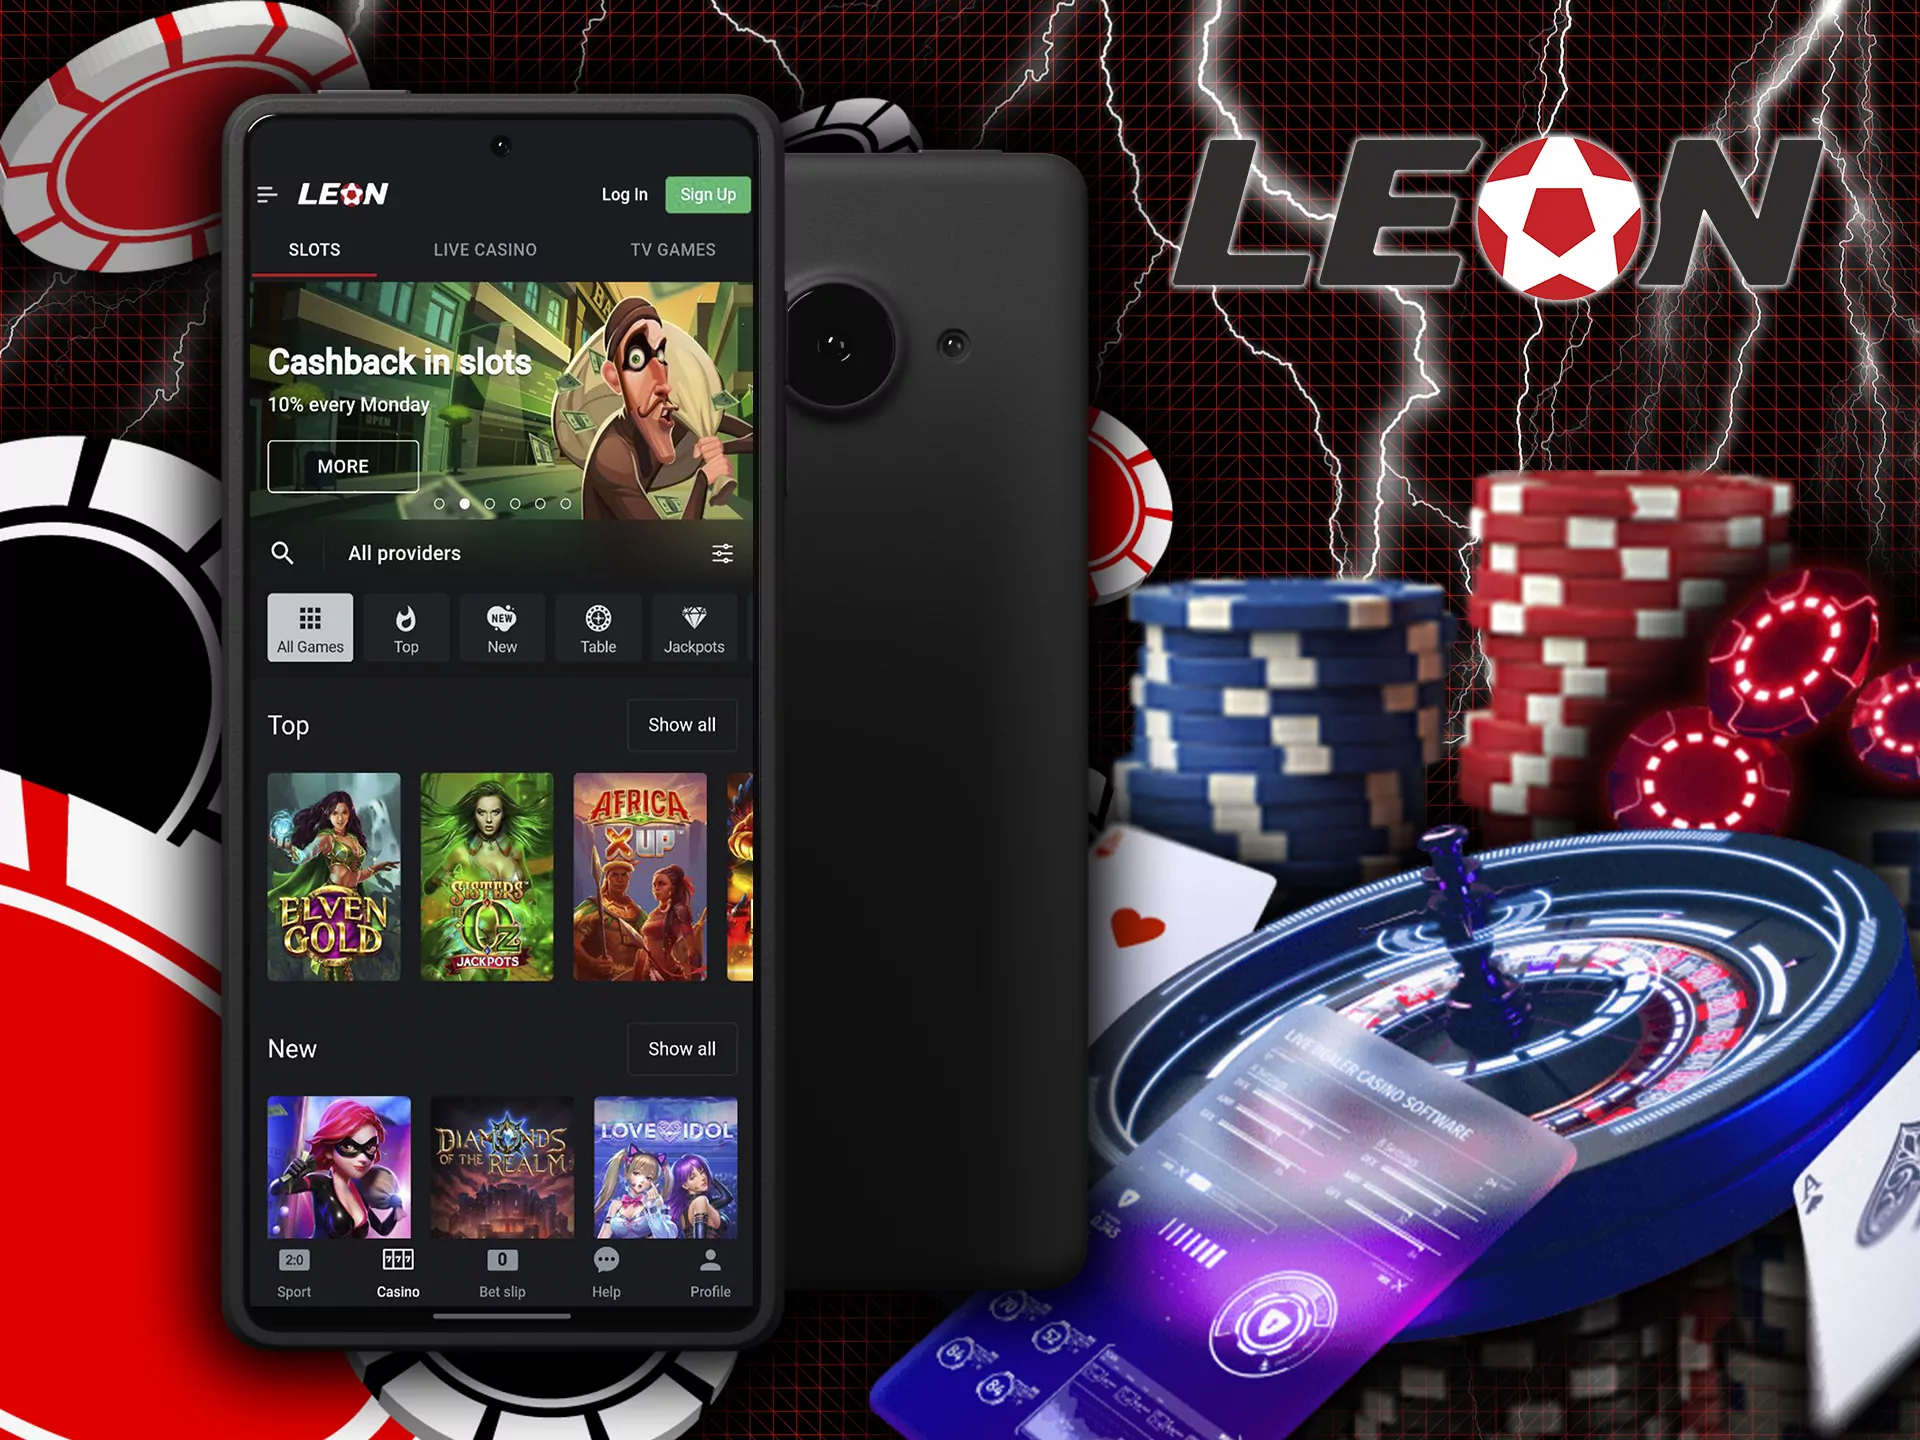 You can also play casino games via our app.